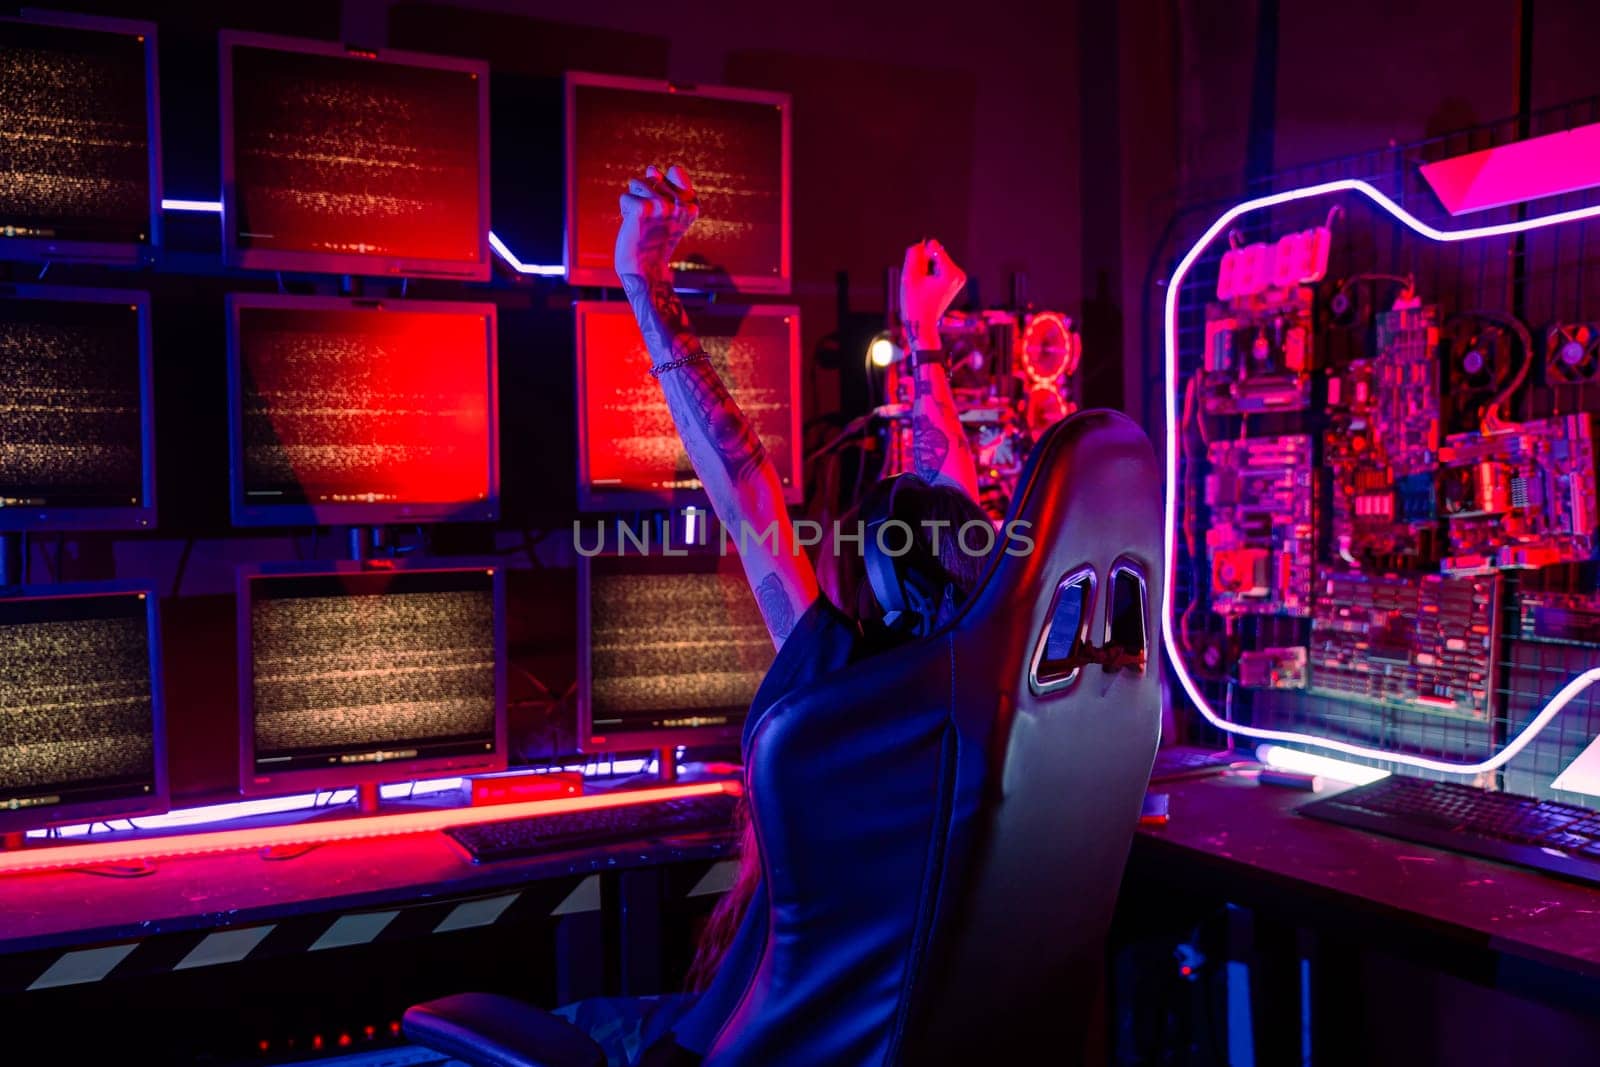 Winning. Happy Gamer young plays online video games computer she raises hands to wins tournament, young woman in gaming headphones playing video game online at home feel excited, E-Sport concept